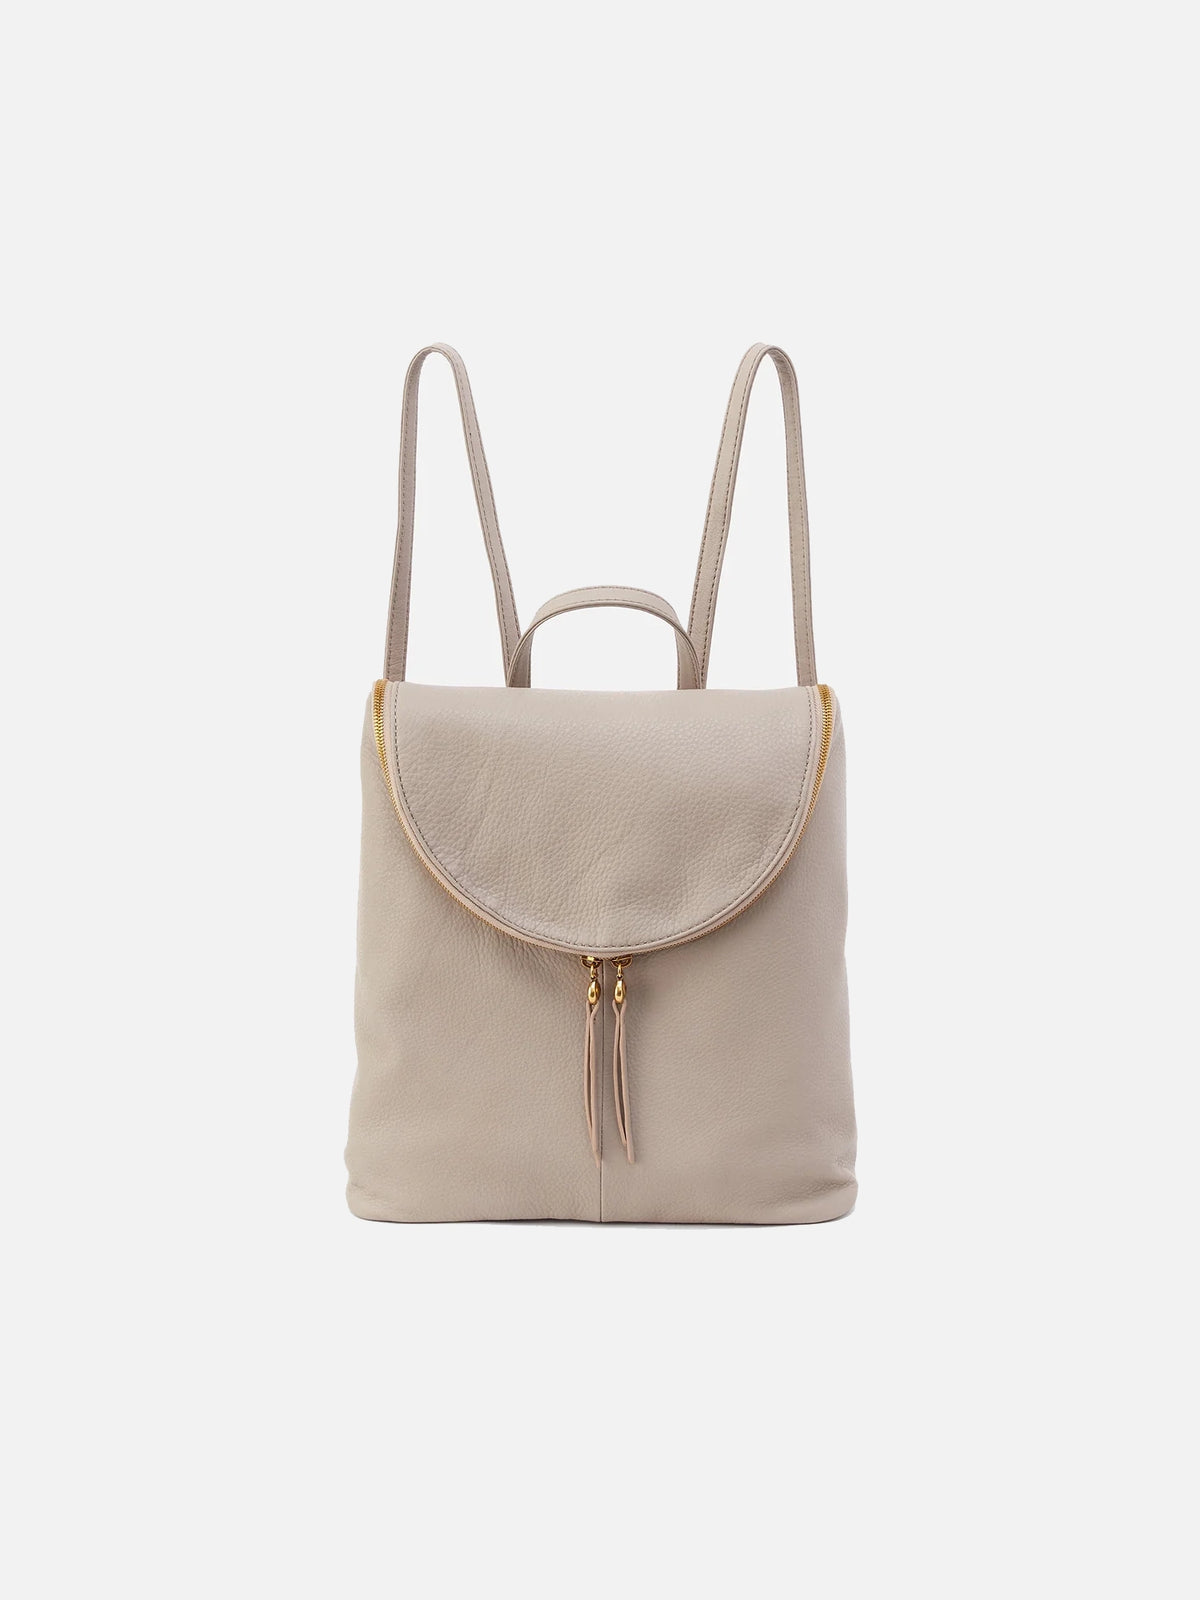 hobo fern backpack in taupe pebbled leather